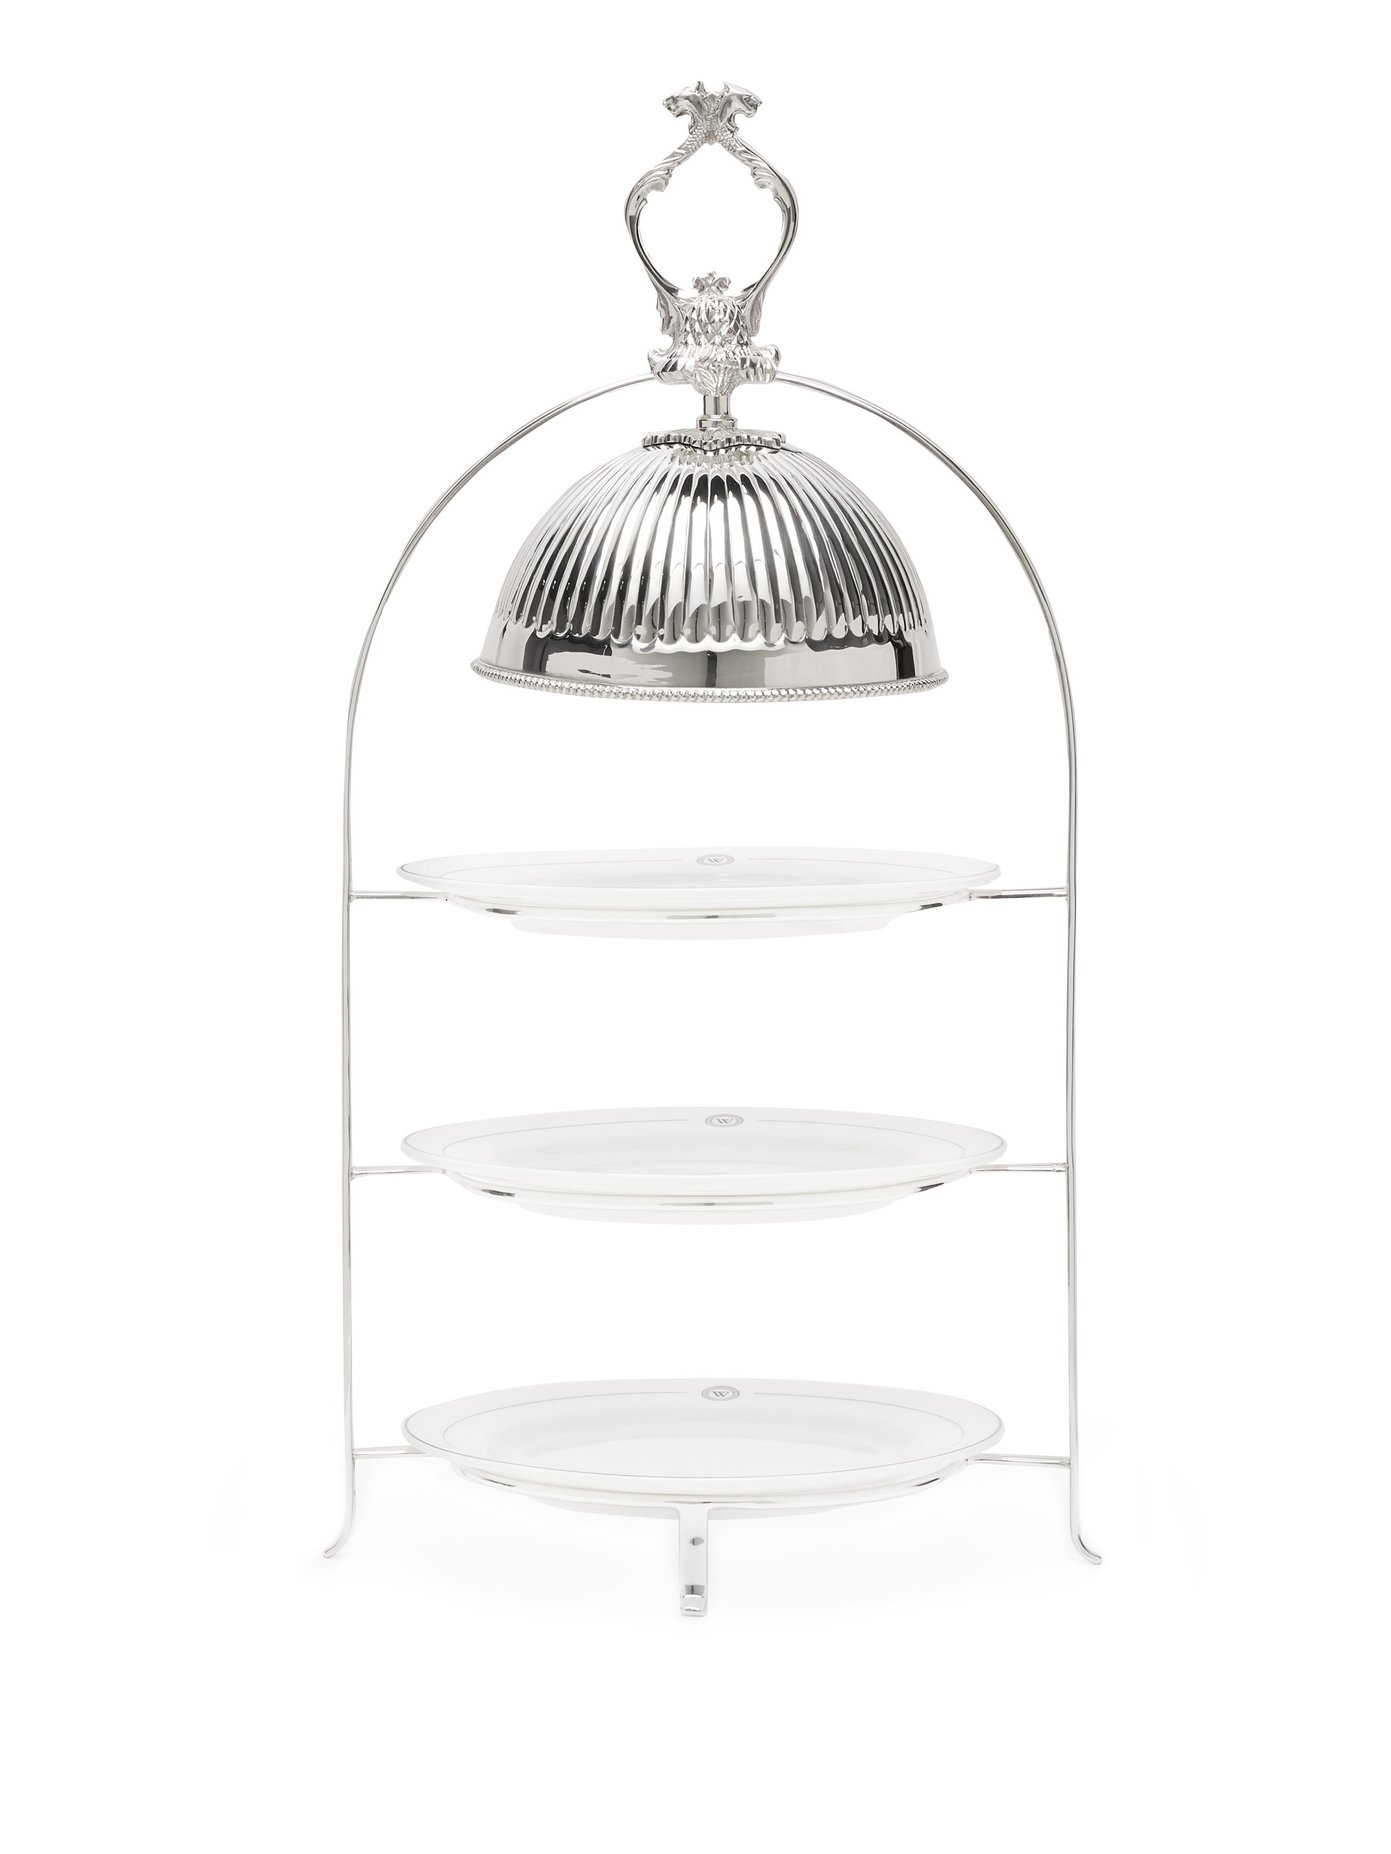 Vintage Silver Plated Afternoon Tea Stand The Wolseley Collection Matchesfashion Uk